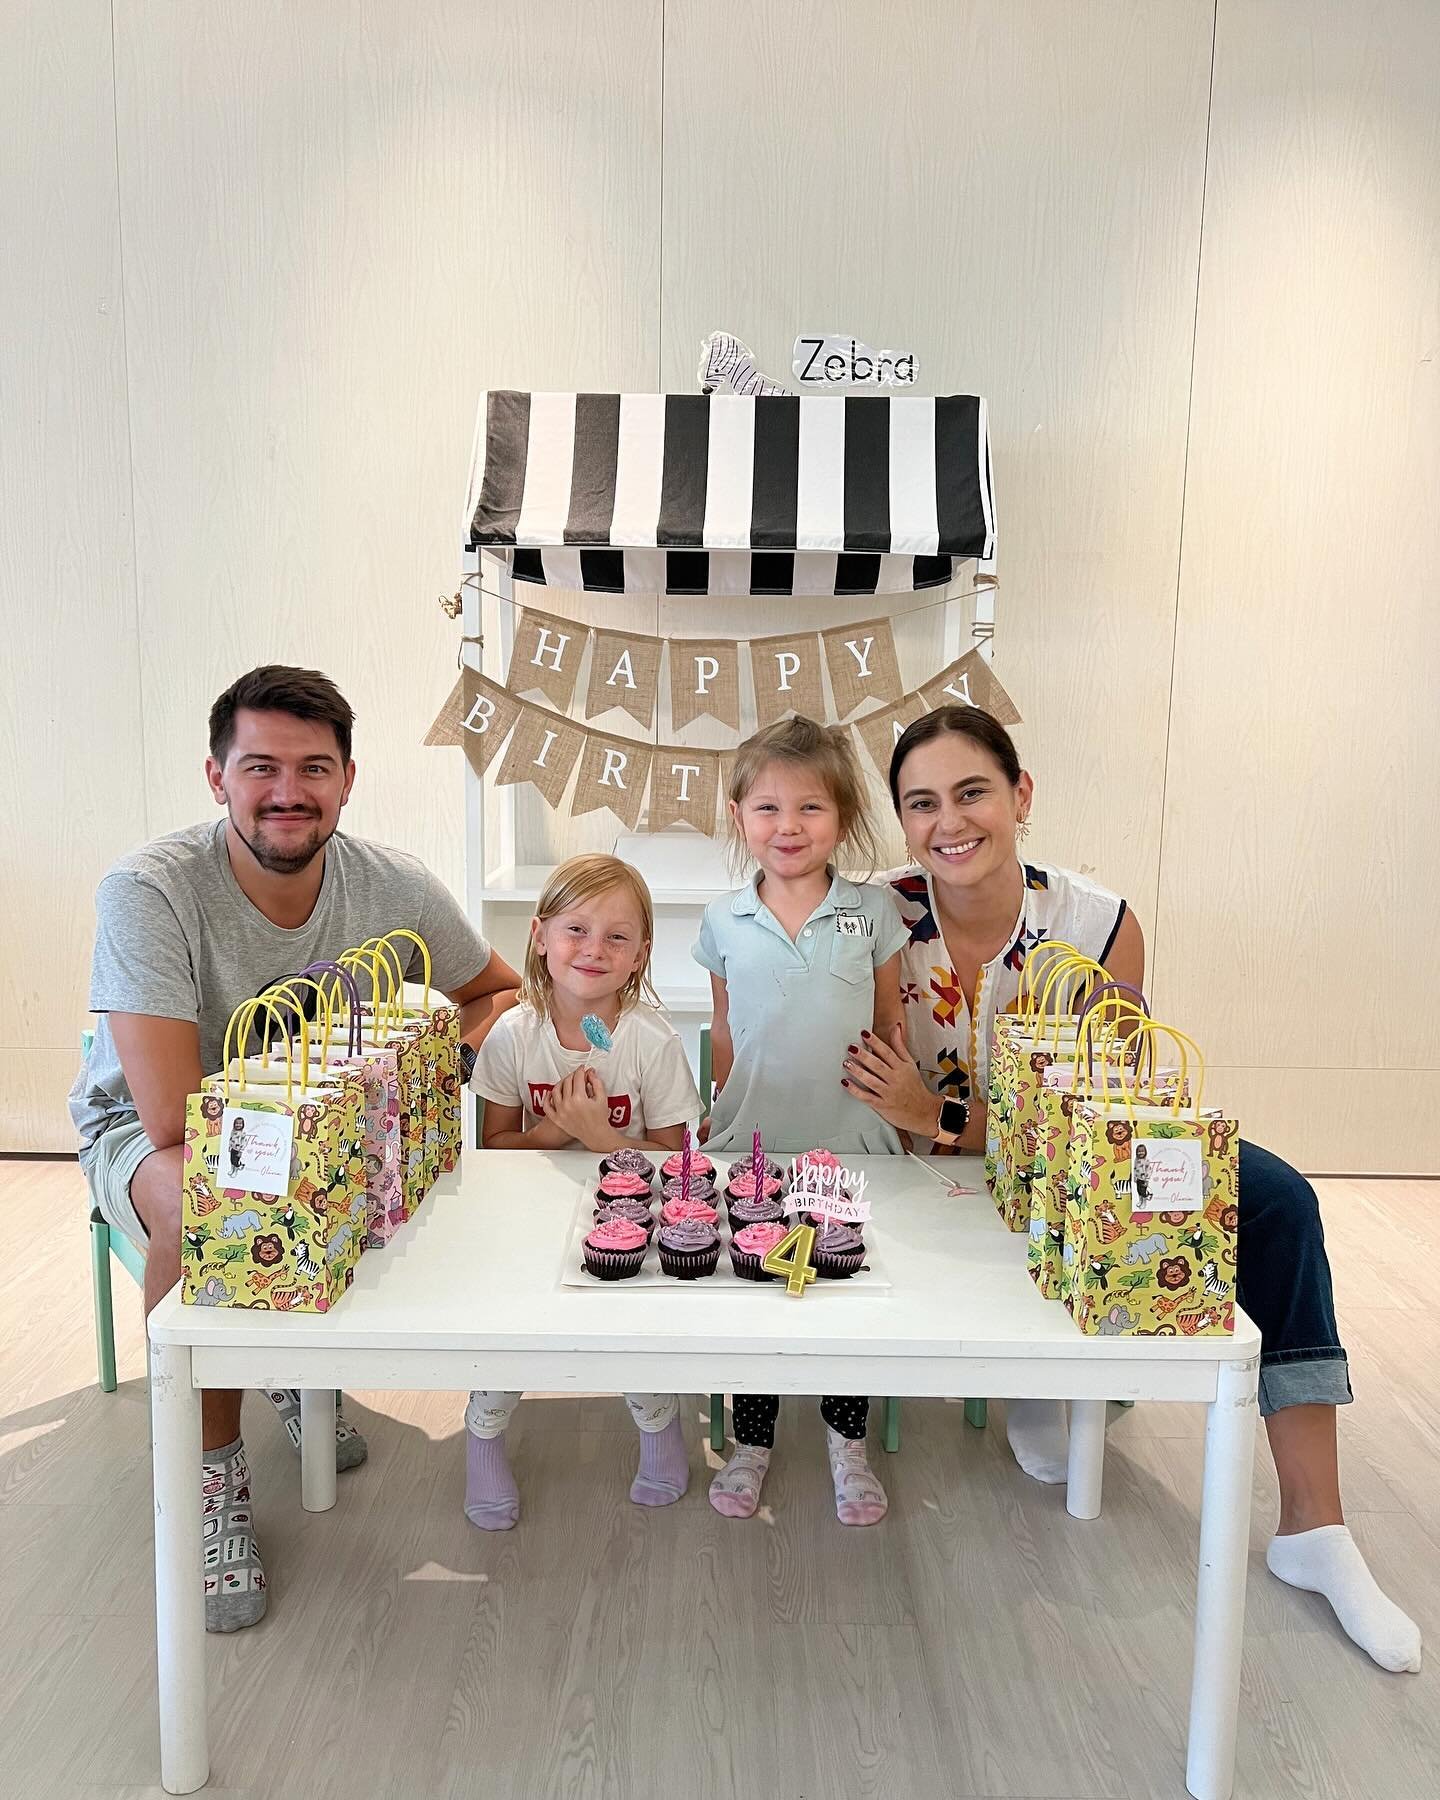 Celebrating Olivia&rsquo;s Birthday at @trehausschoolsingapore with her friends! 🥳

I also had the pleasure to read some stories to the class, ready to jump in any time as a part time teacher 😉